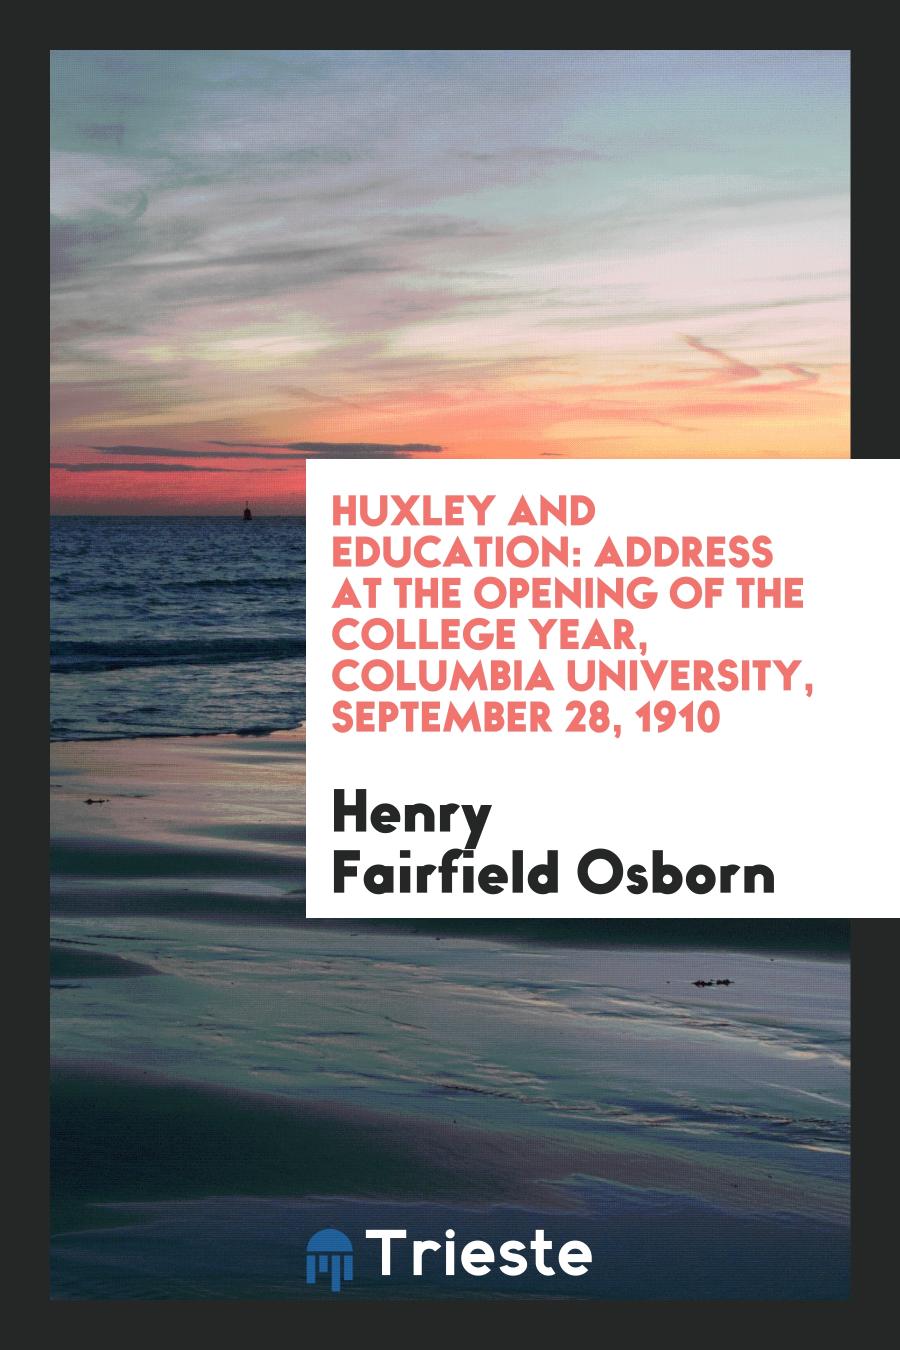 Huxley and Education: Address at the Opening of the College Year, Columbia University, September 28, 1910